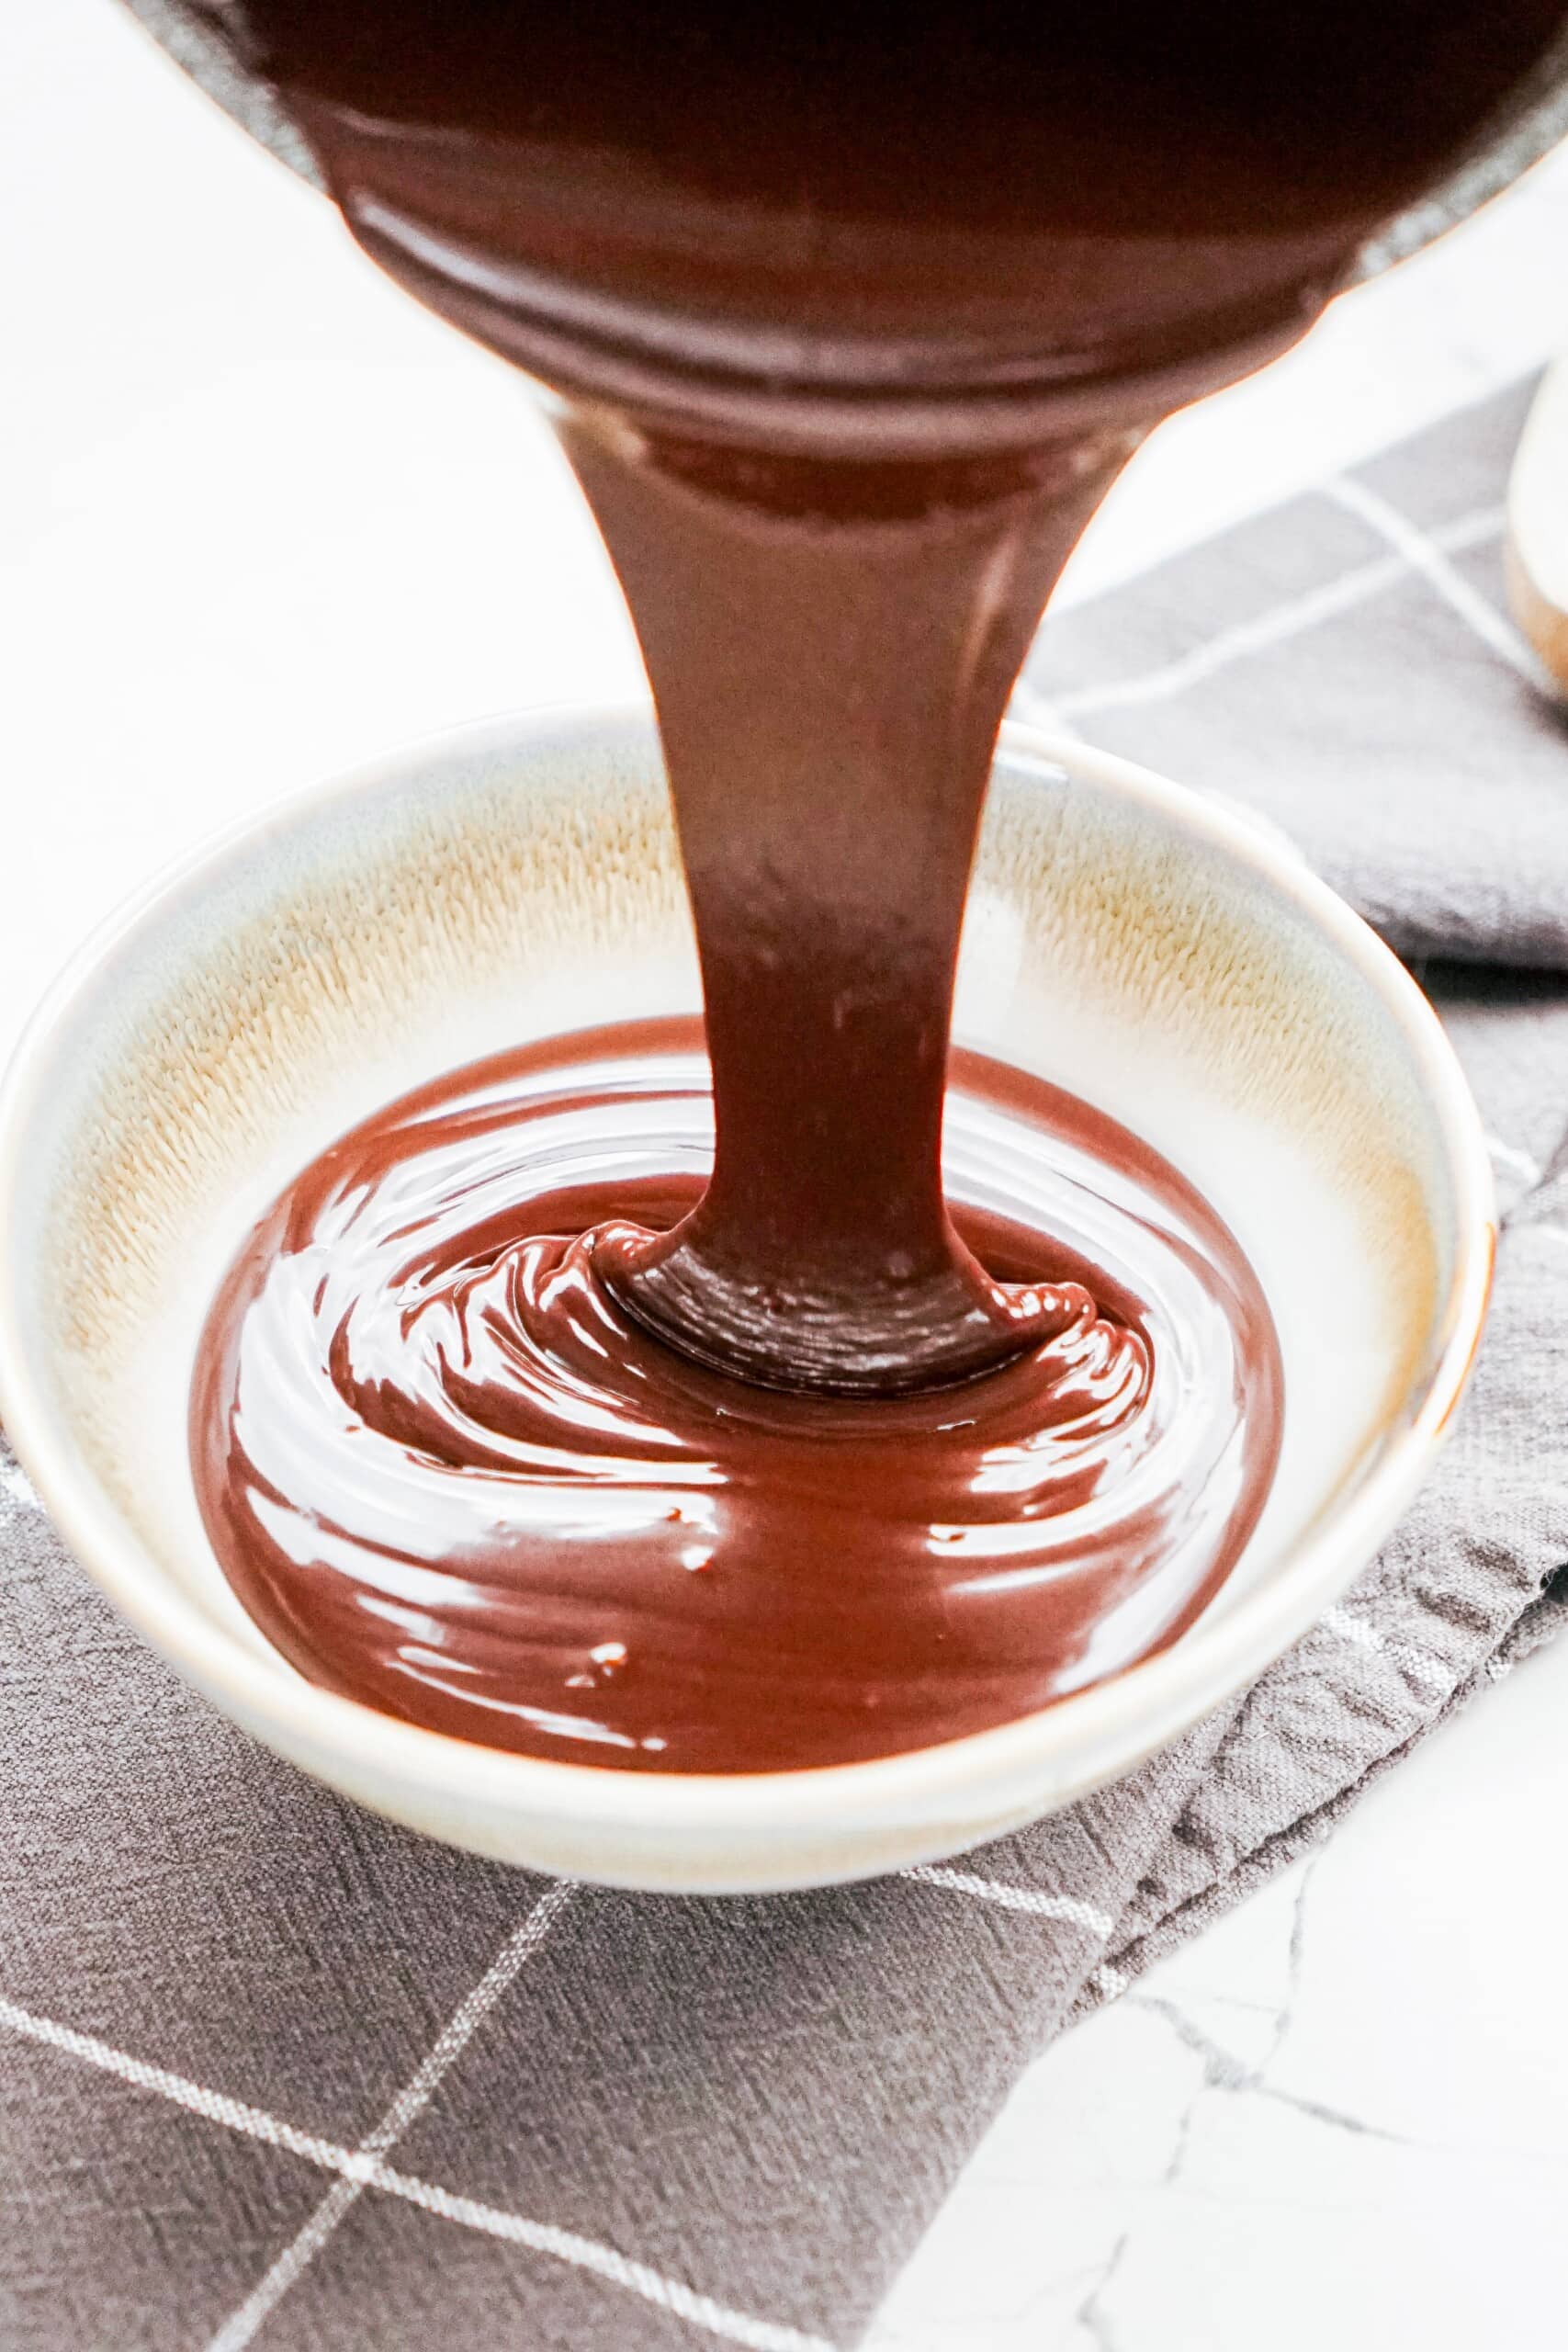 dipping chocolate being poured into a bowl